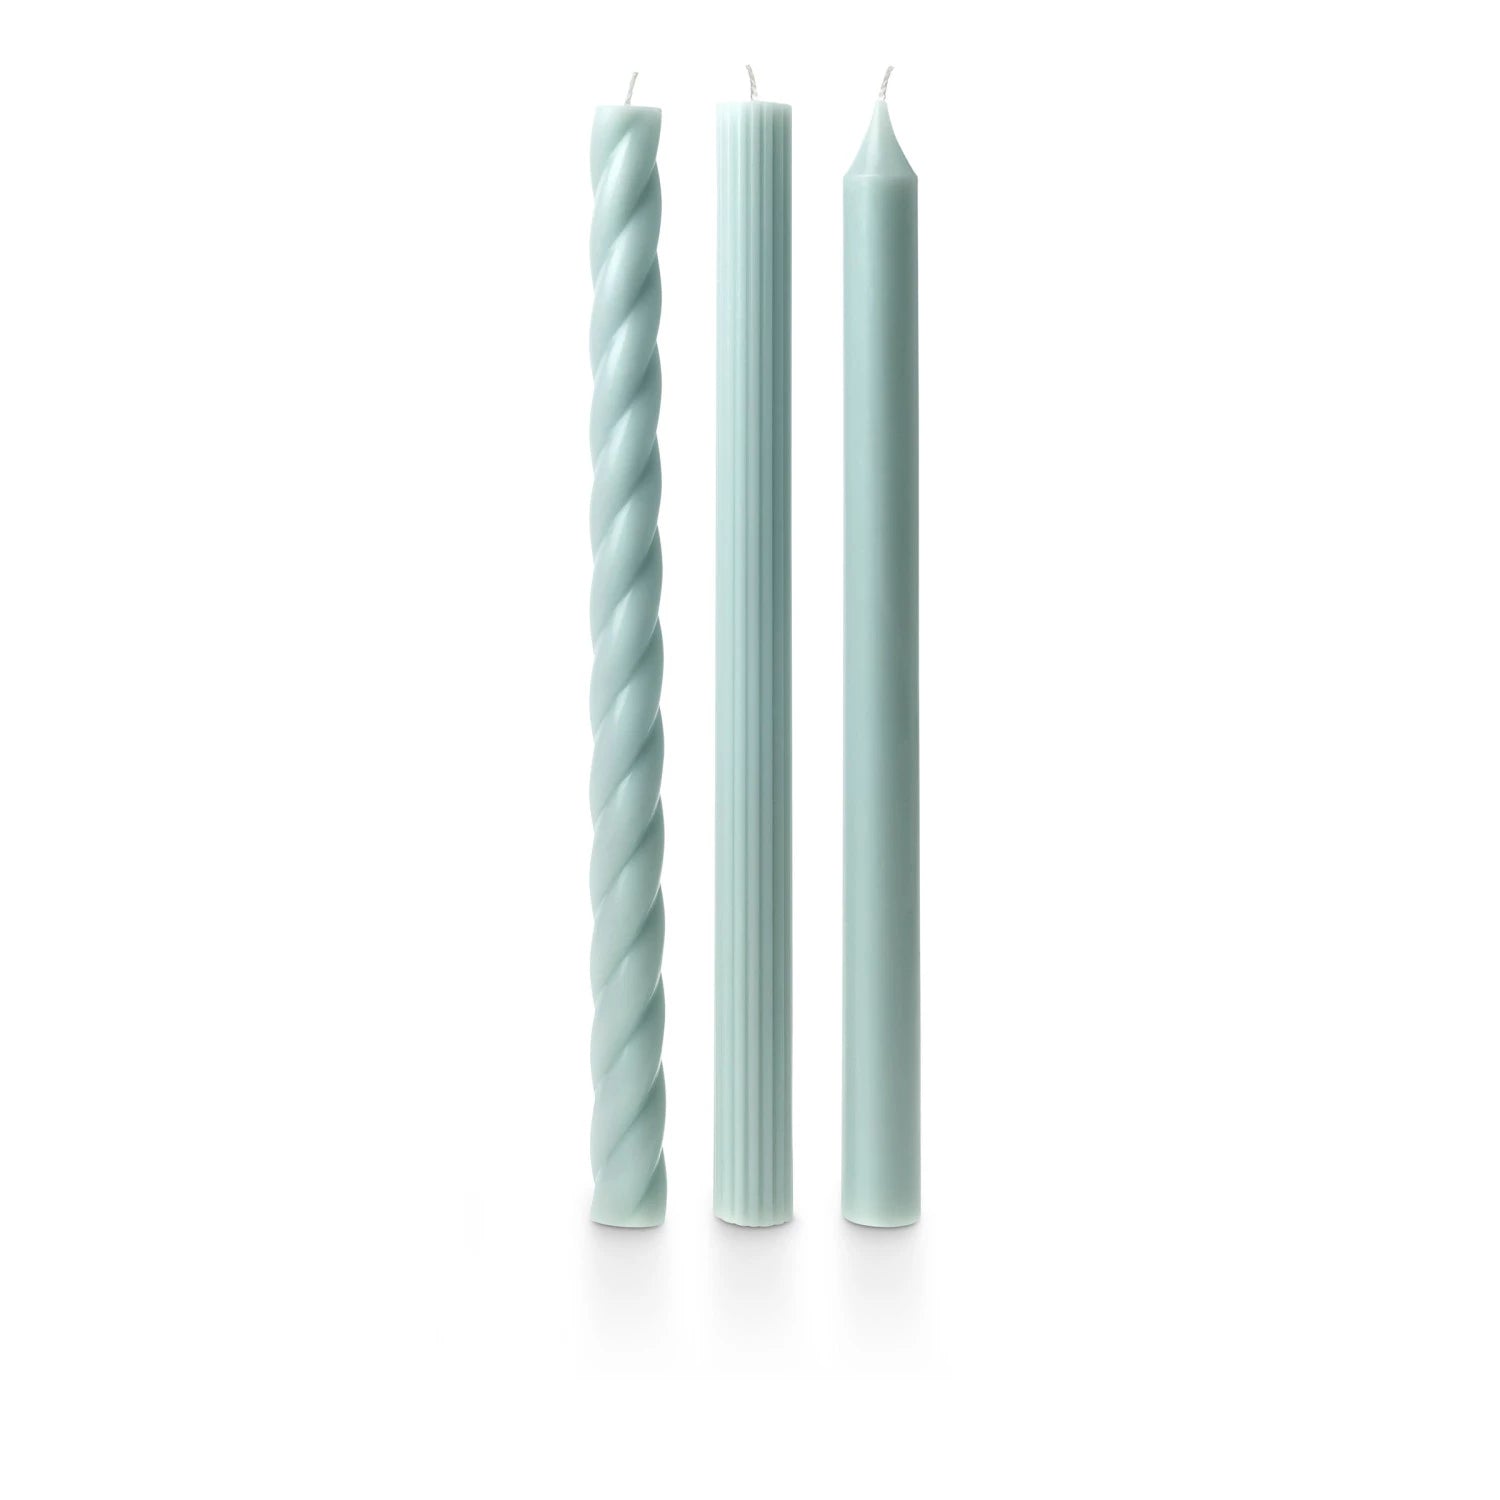 Assorted Candle Tapers 3-Pack - Light Blue